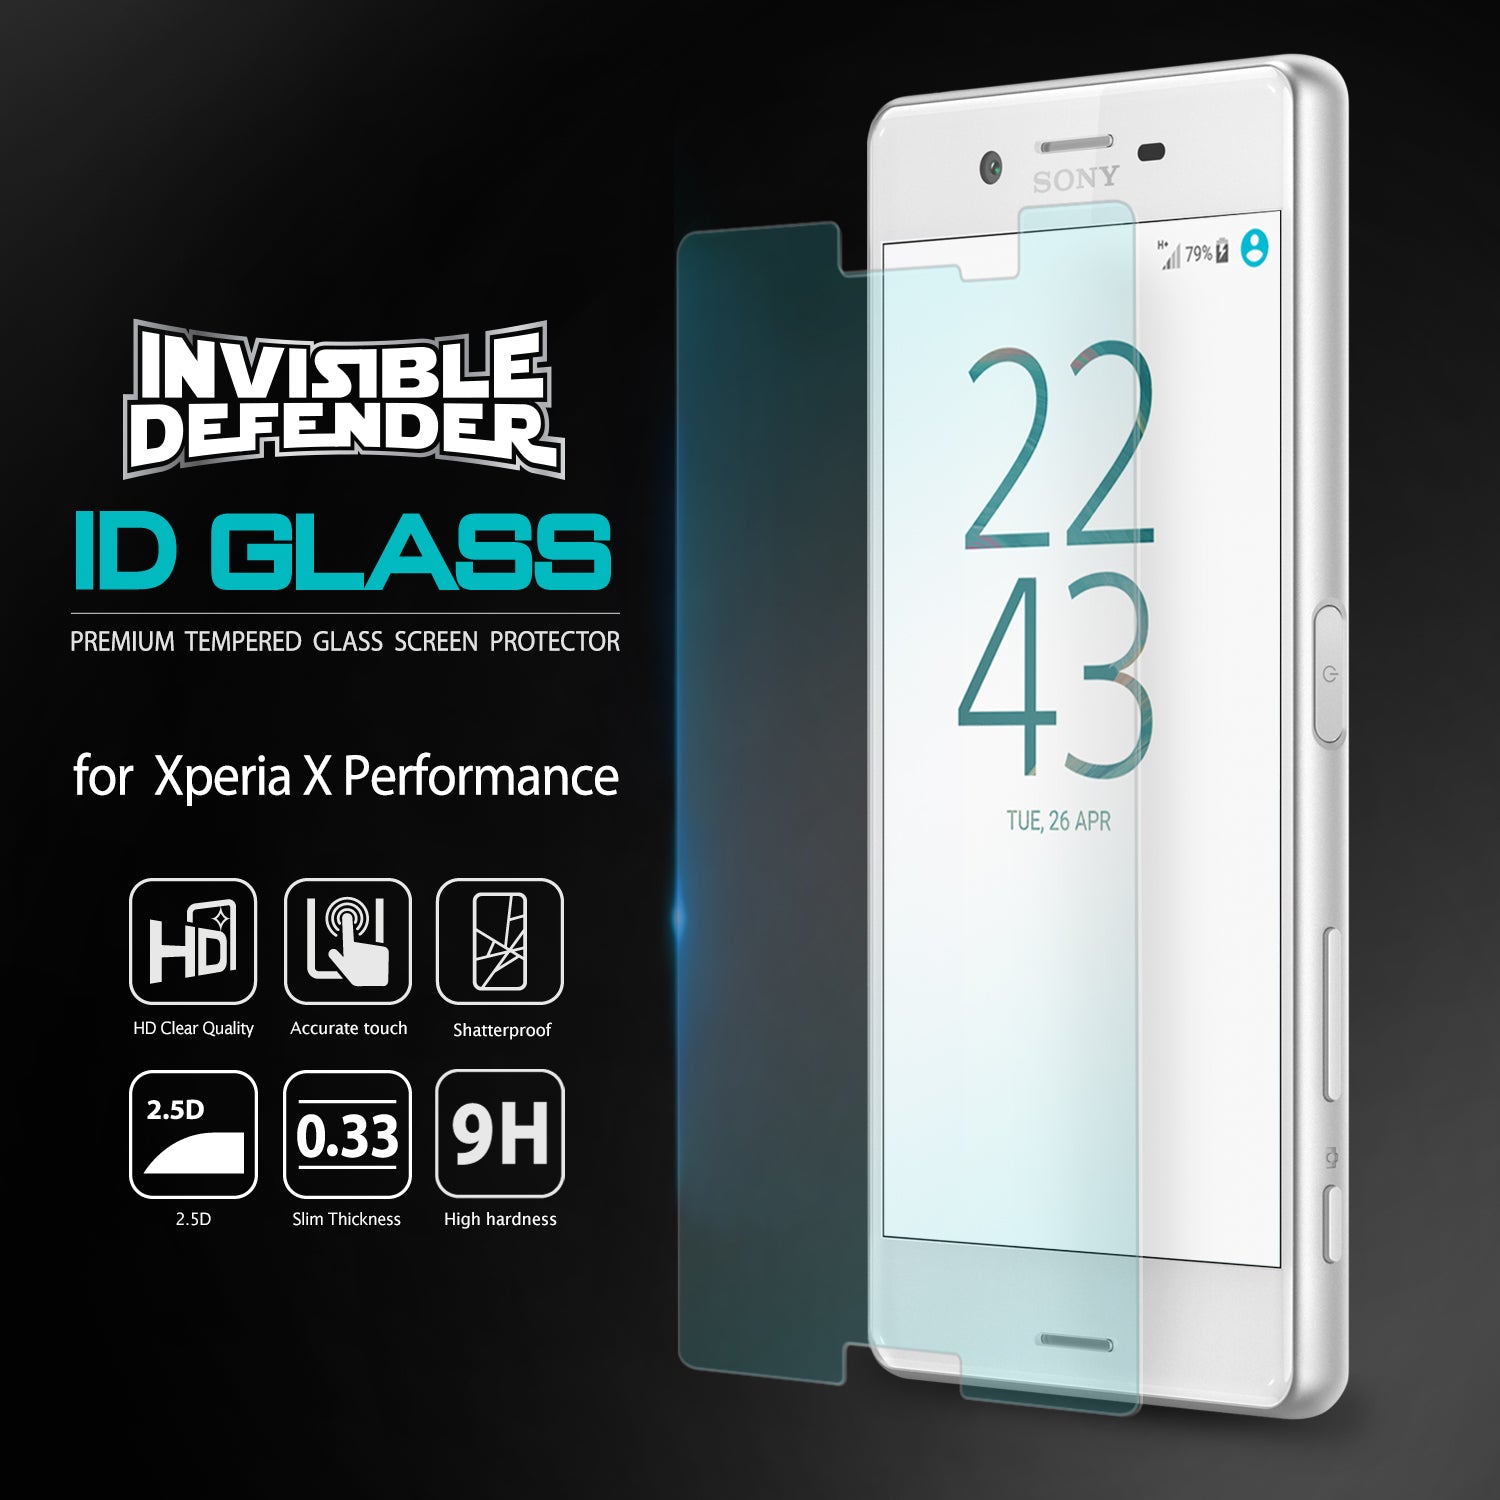 ringke invisible defender glass for xperia x performance